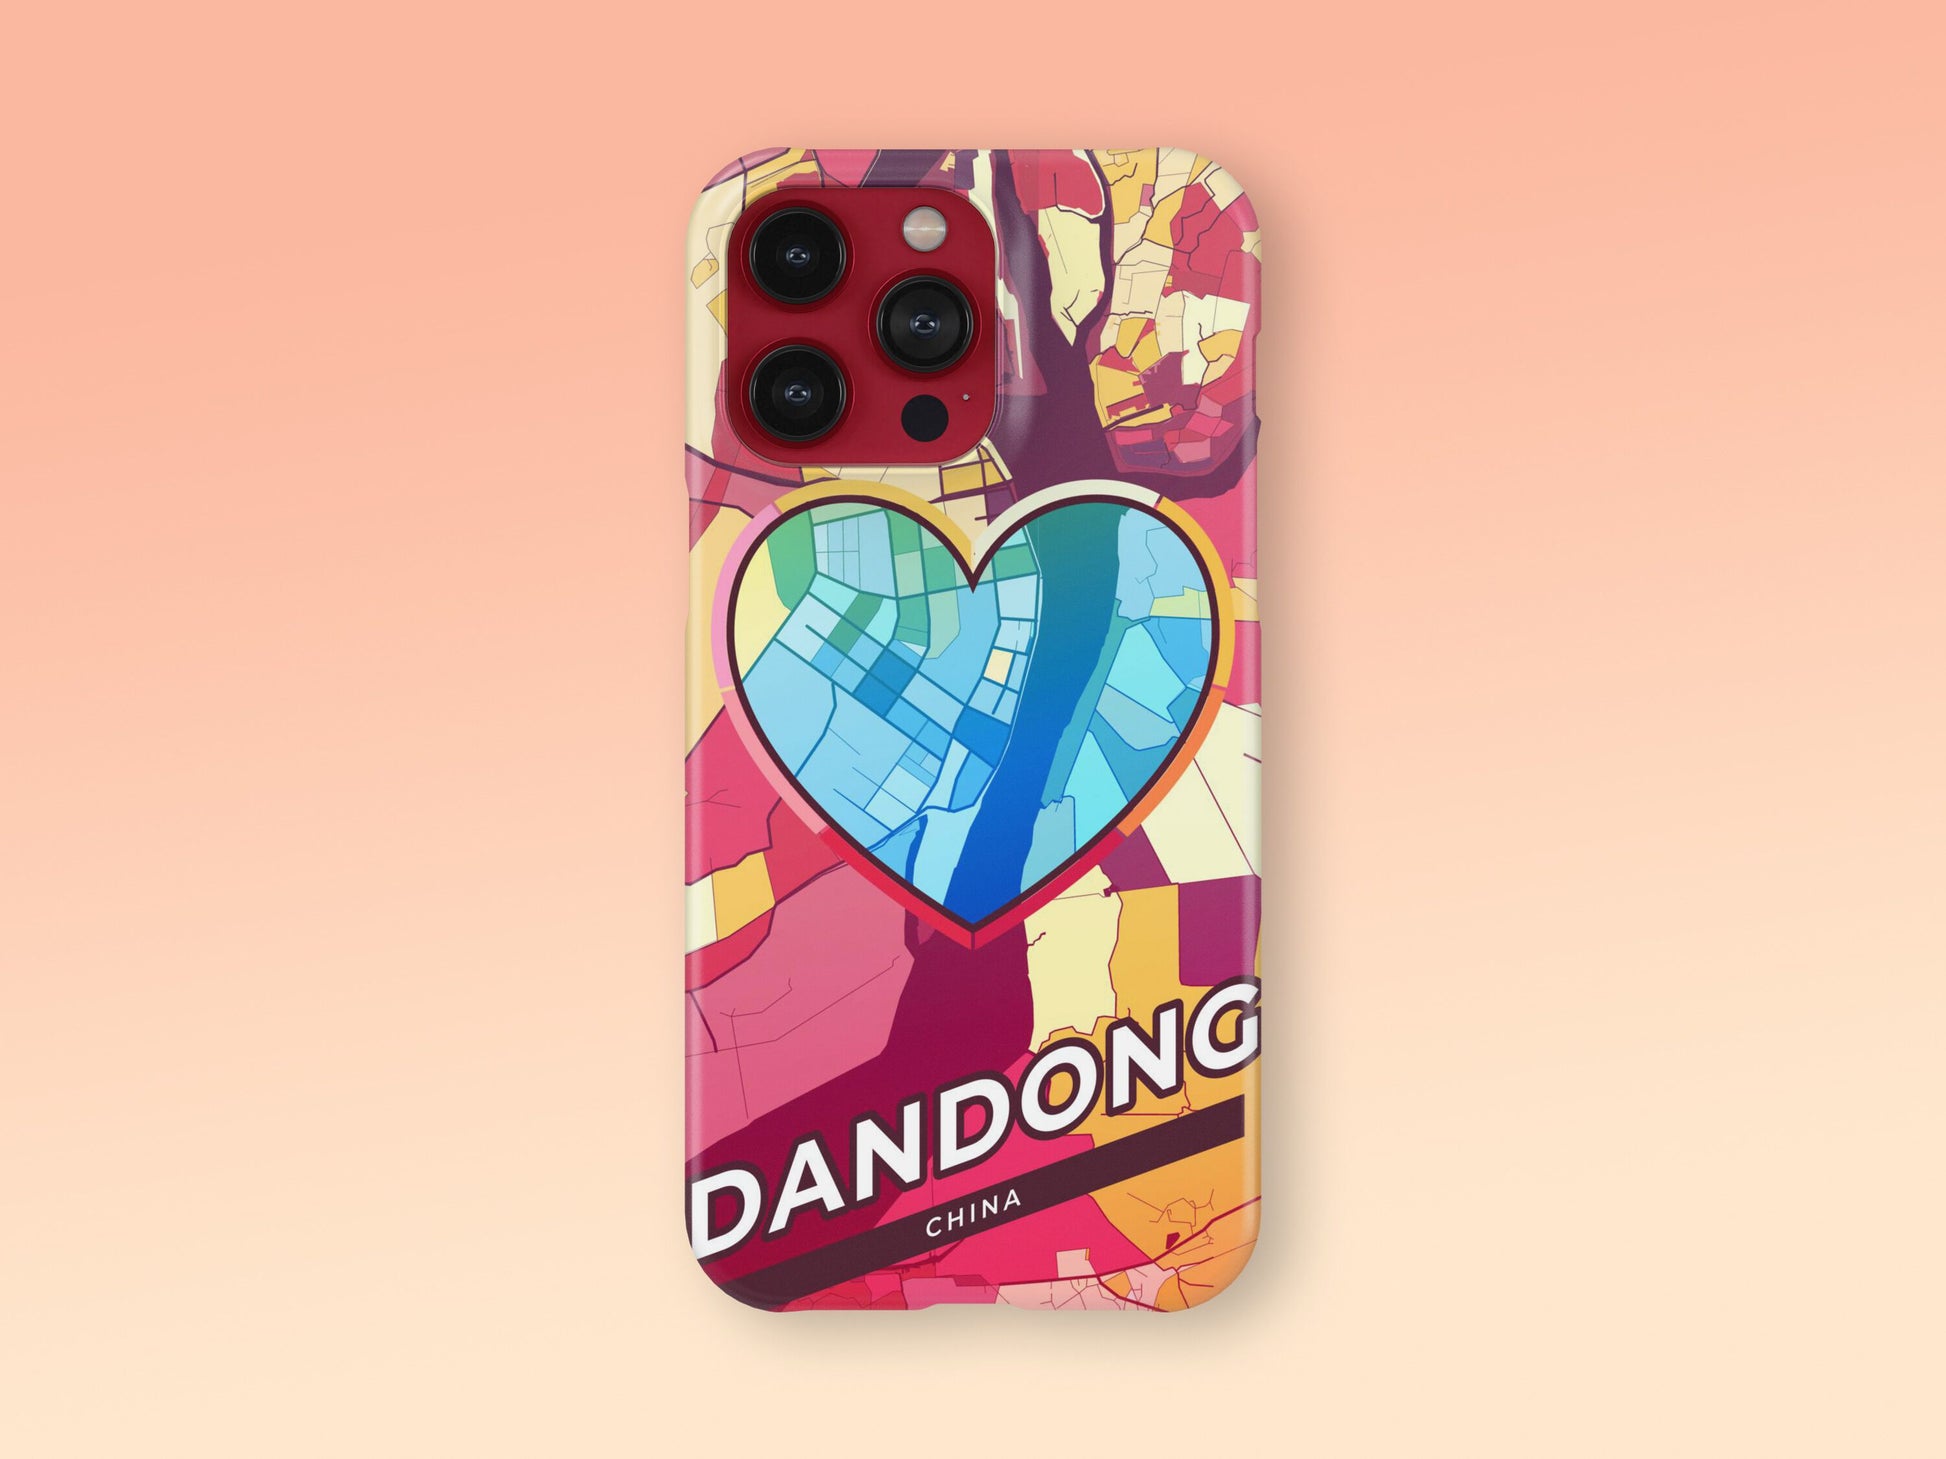 Dandong China slim phone case with colorful icon. Birthday, wedding or housewarming gift. Couple match cases. 2